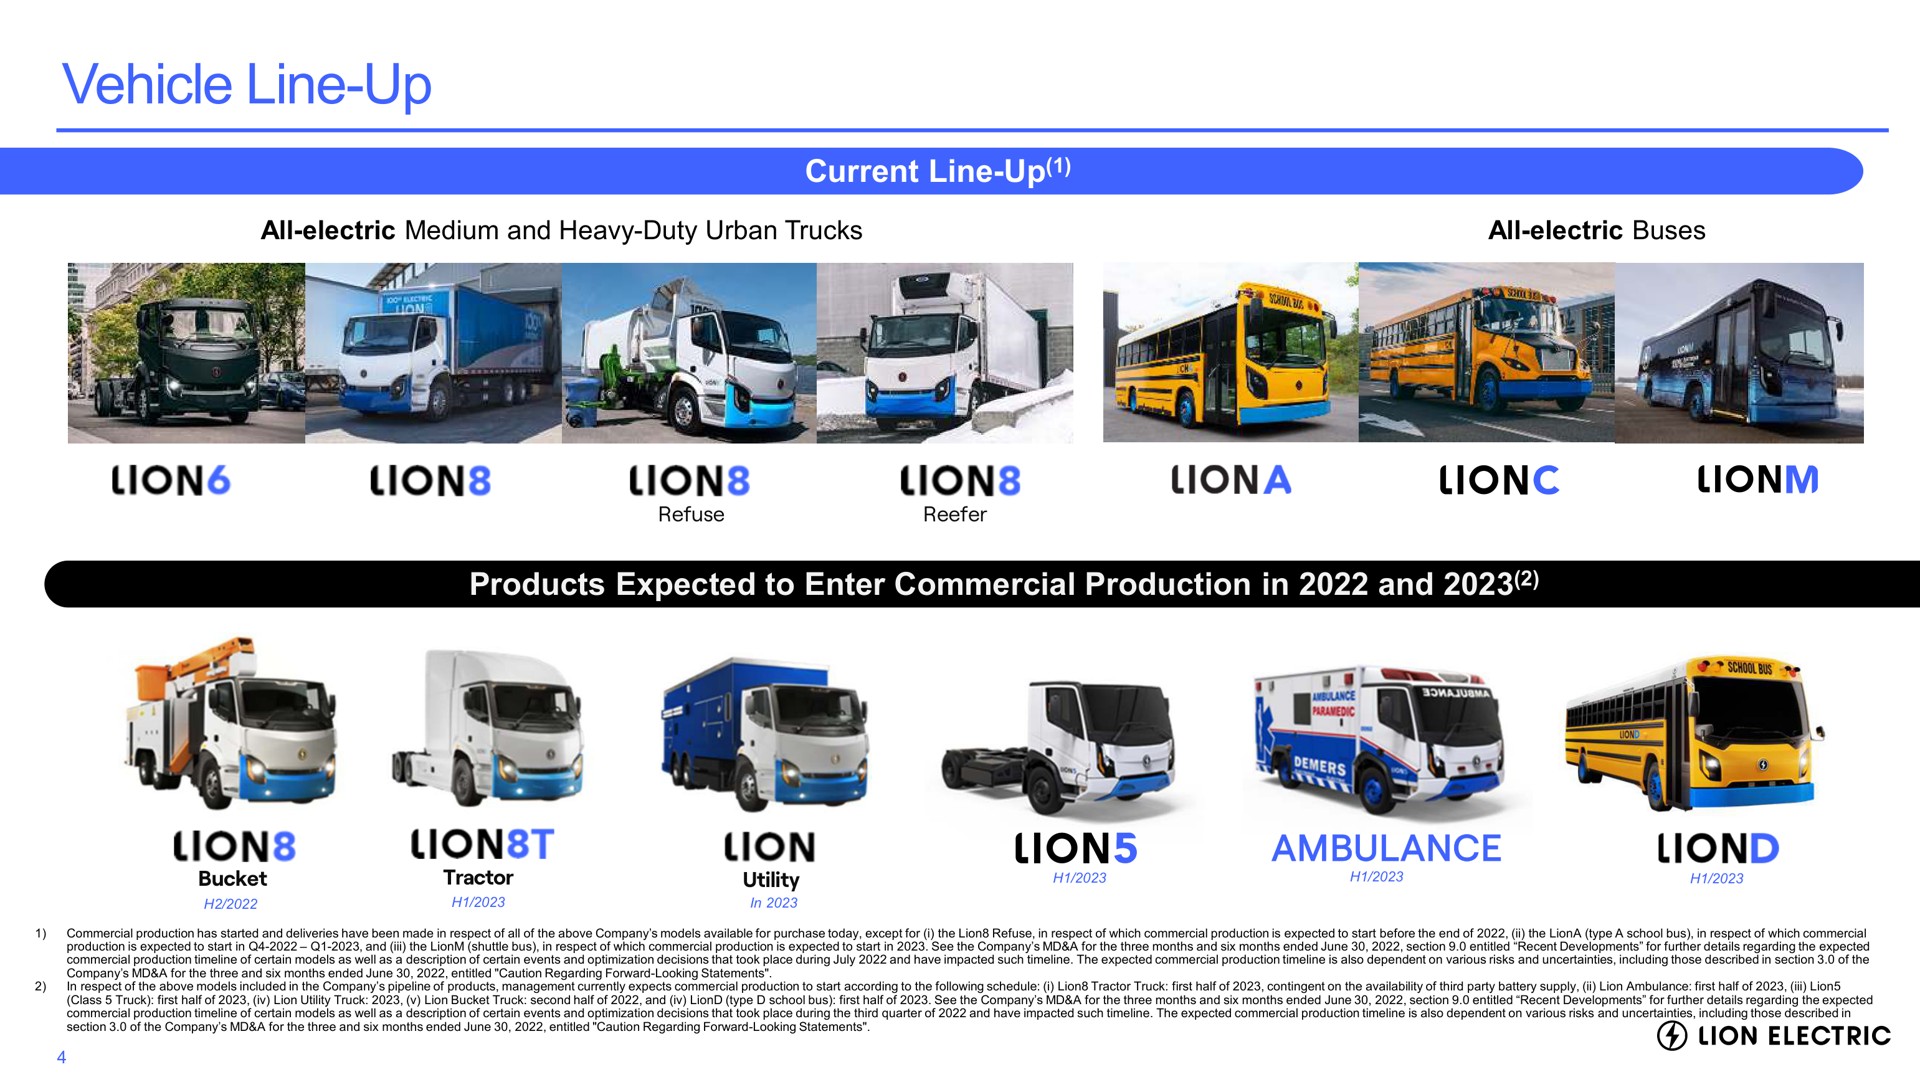 vehicle line up all electric medium and heavy duty urban trucks all electric buses current line up products expected to enter commercial production in and ambulance lions lions lions lions lion lions | Lion Electric